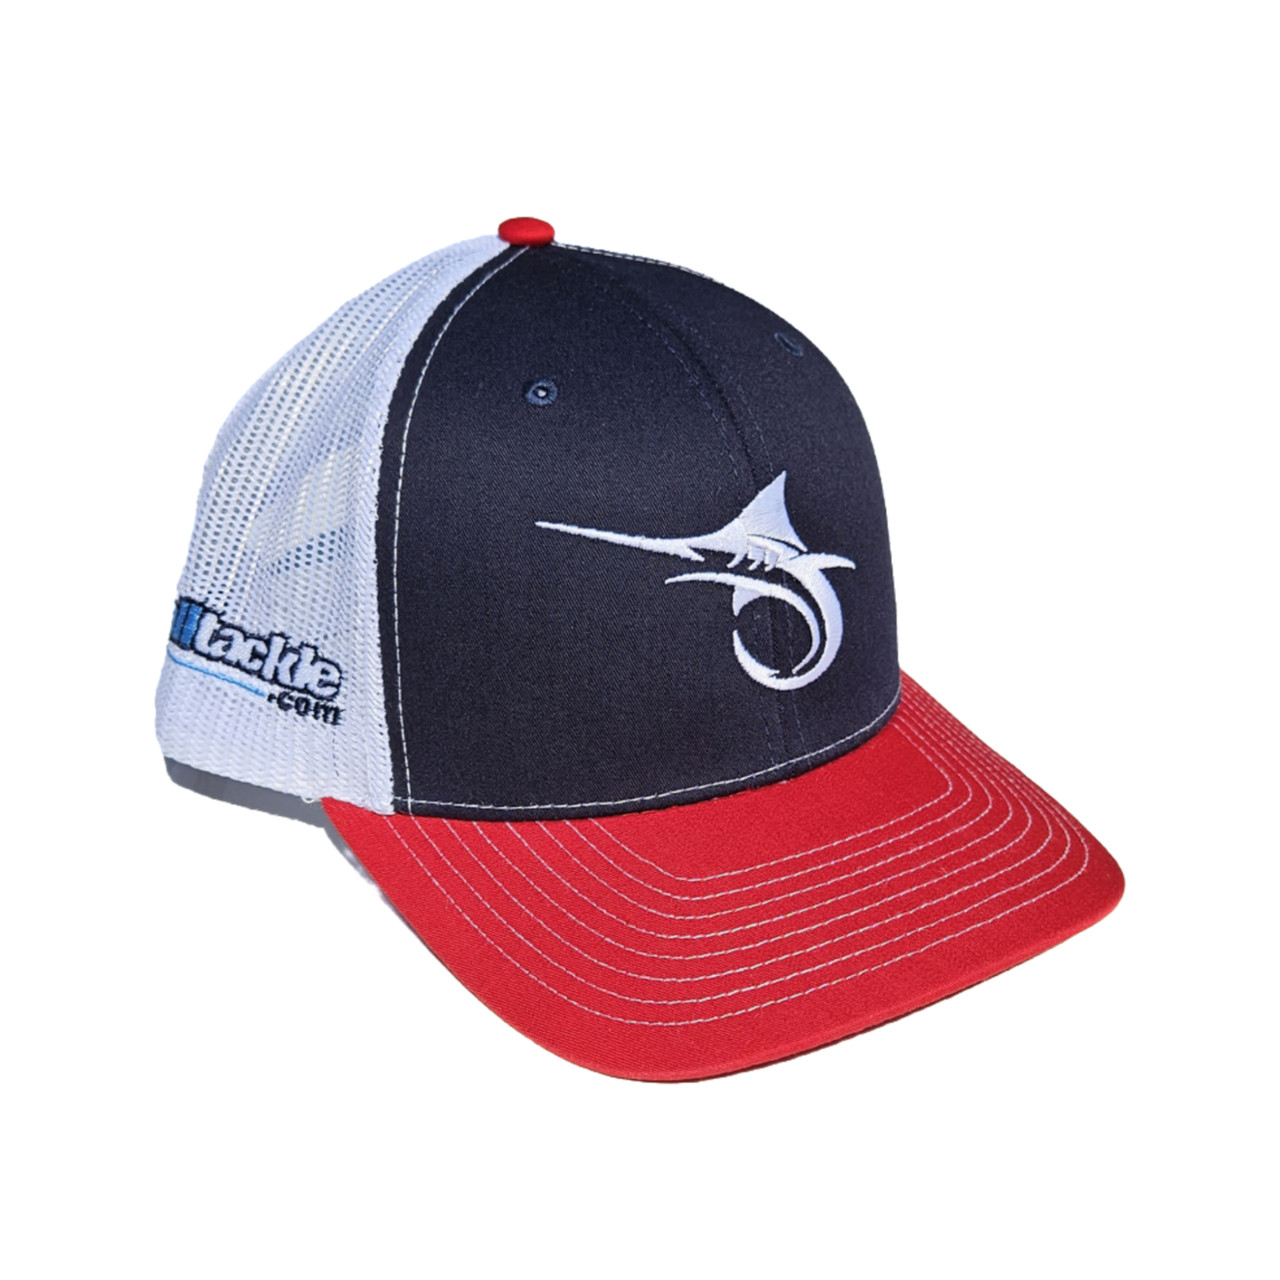 Alltackle Fishing Hat - Marlin Hook - Colors of Freedom